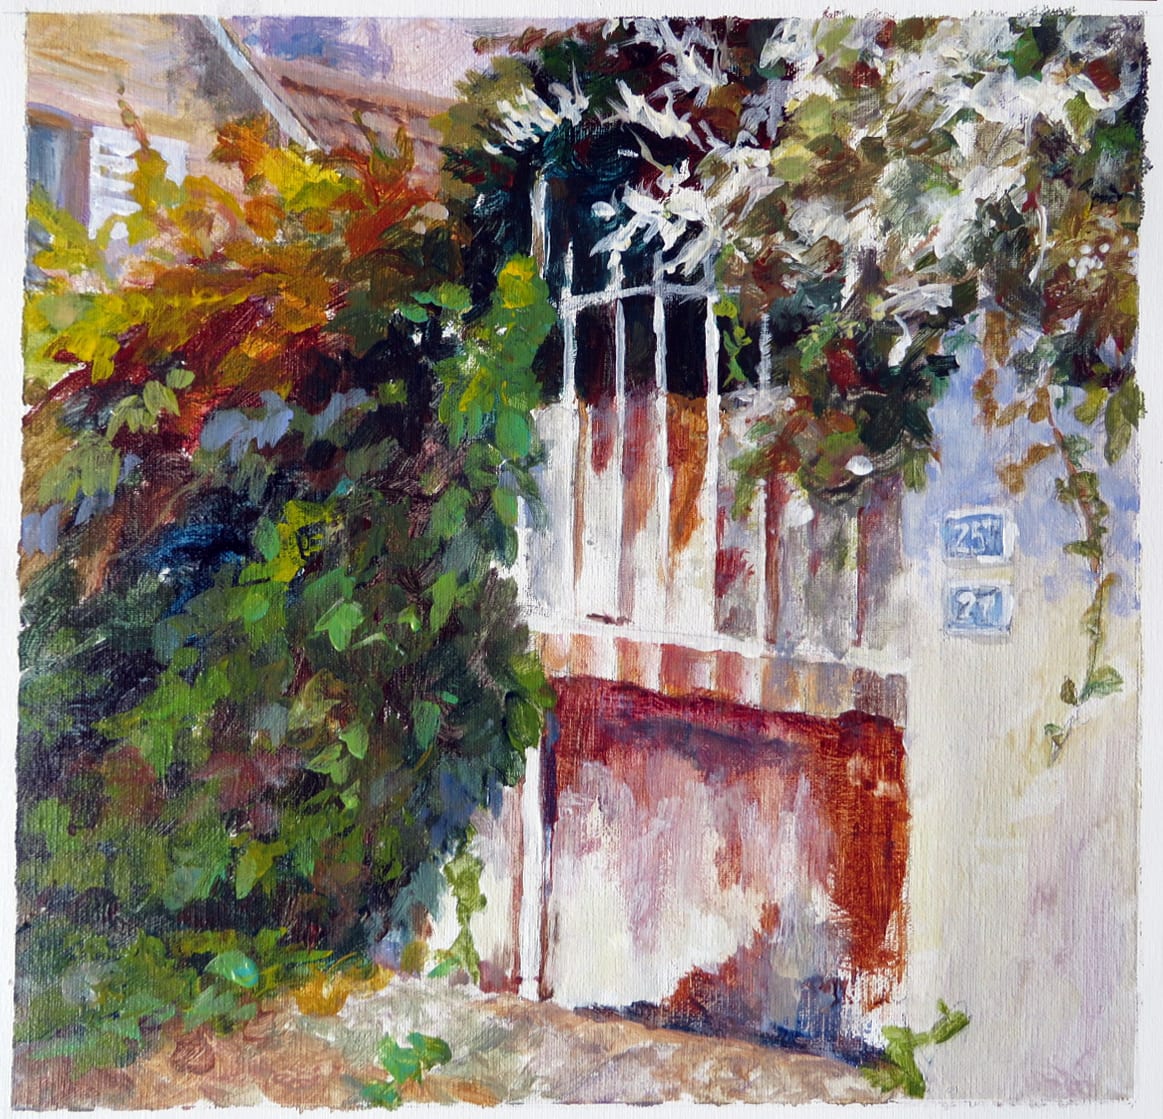 Gate on Blvd de Monet - Giverny by Jann Lawrence Pollard  Image: On a Walk to Giverny, France